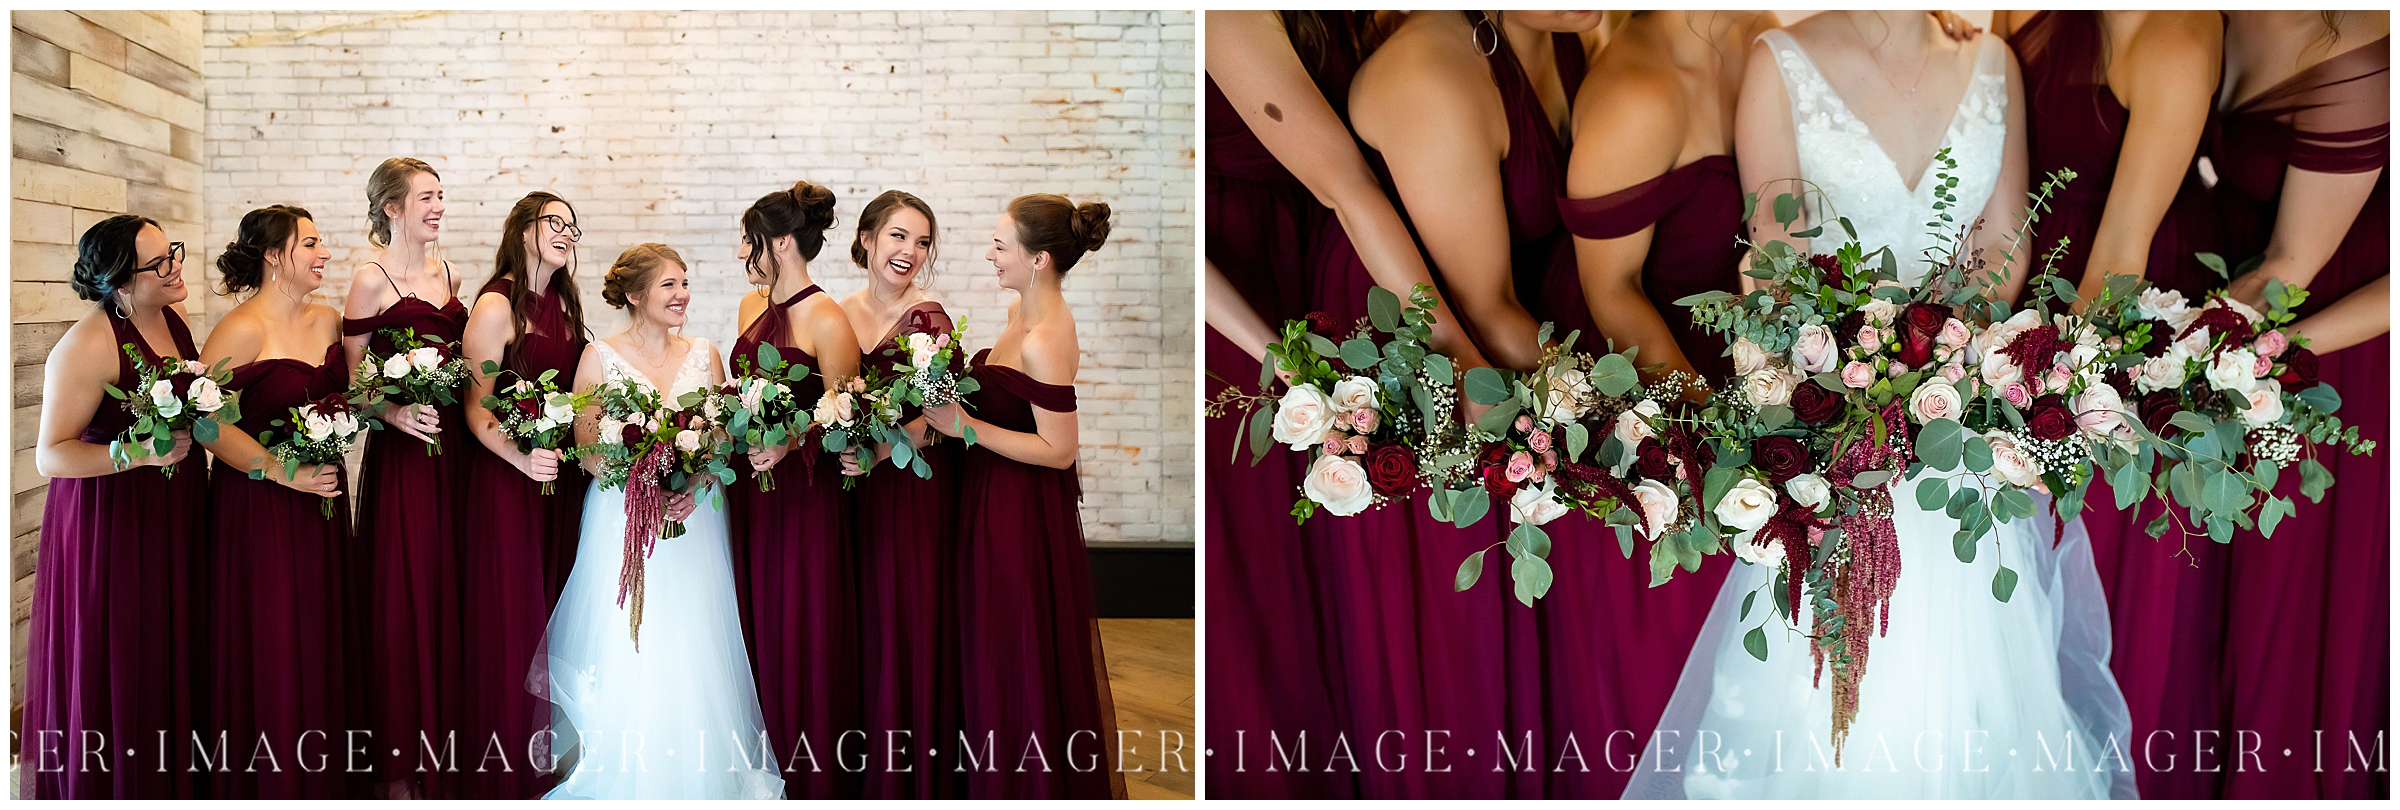 maroon and blush bridal bouquets